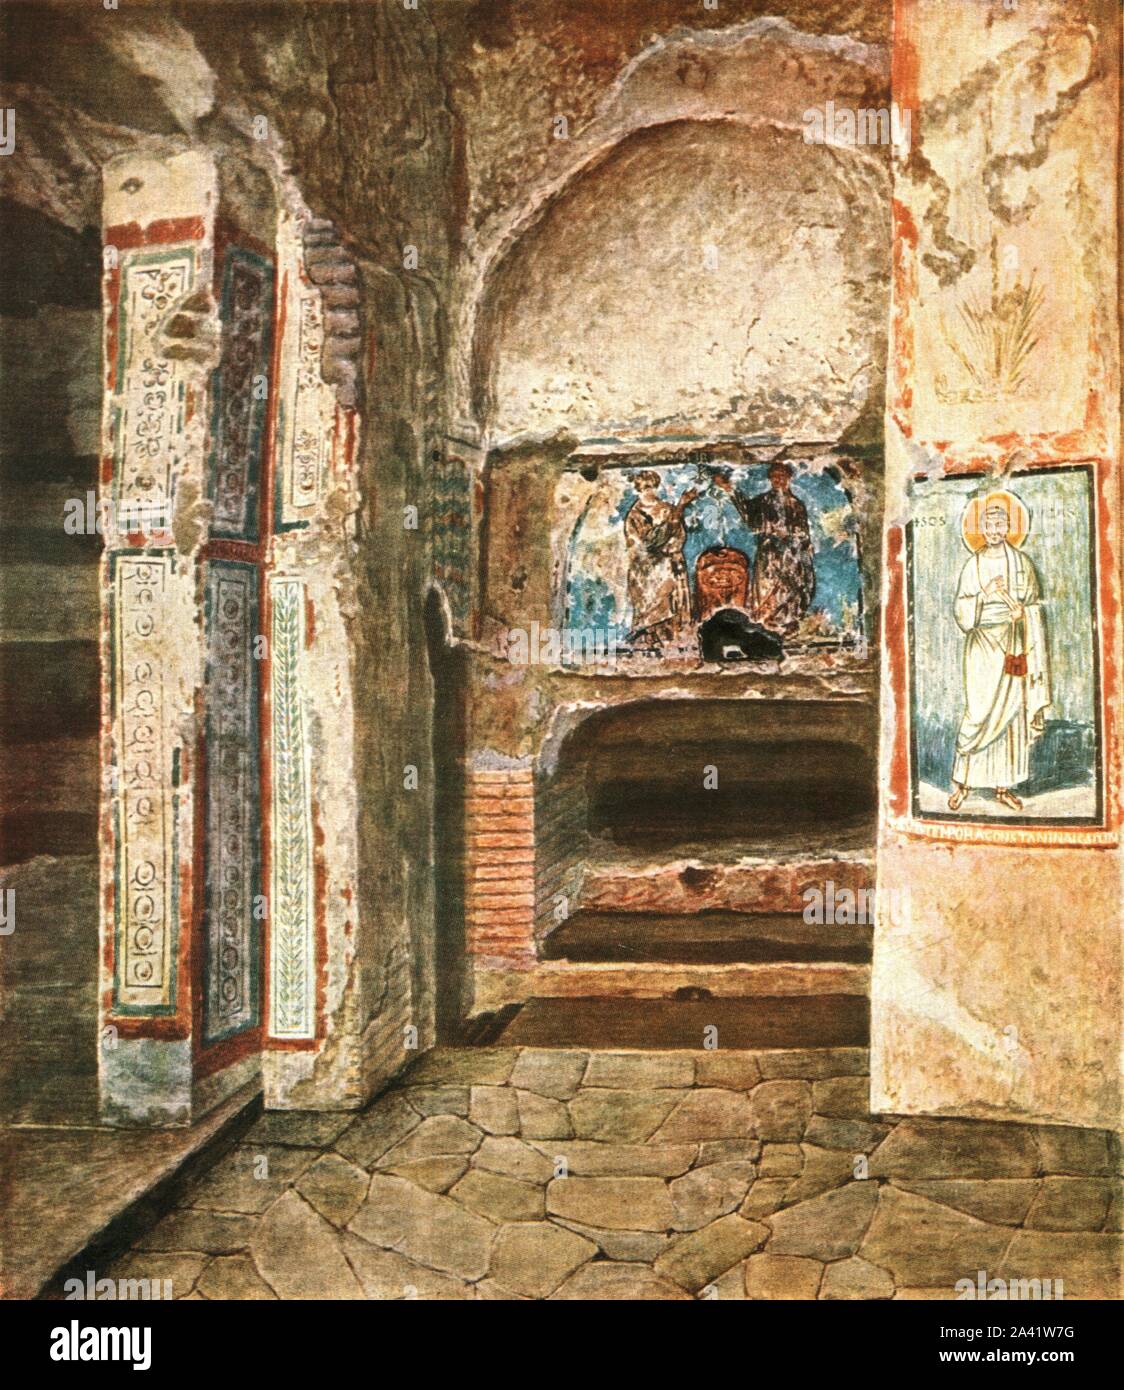 The burial-chapel of SS. Felix and Adauctus in the Catacombs of Commodilla, Rome, Italy, (1928). '4th and 7th Century...In the background the tomb of St. Felix, over it the two martyrs; between them, above, the monogram of Christ, below a shrine with sacred parchments. From the times of Damasus (366-384) and Siricius (384-398)...On right of St. Felix' tomb St. Luke with an inscription: &quot;Sub Tempora Constantino Augusto Nostro Factum Est.&quot; [Wilpert] states that this inscription refers to the Emperor Constantine IV, Pogonatus (668-685)'. After Joseph Wilpert. Plate XLVIII, fig 106, from Stock Photo